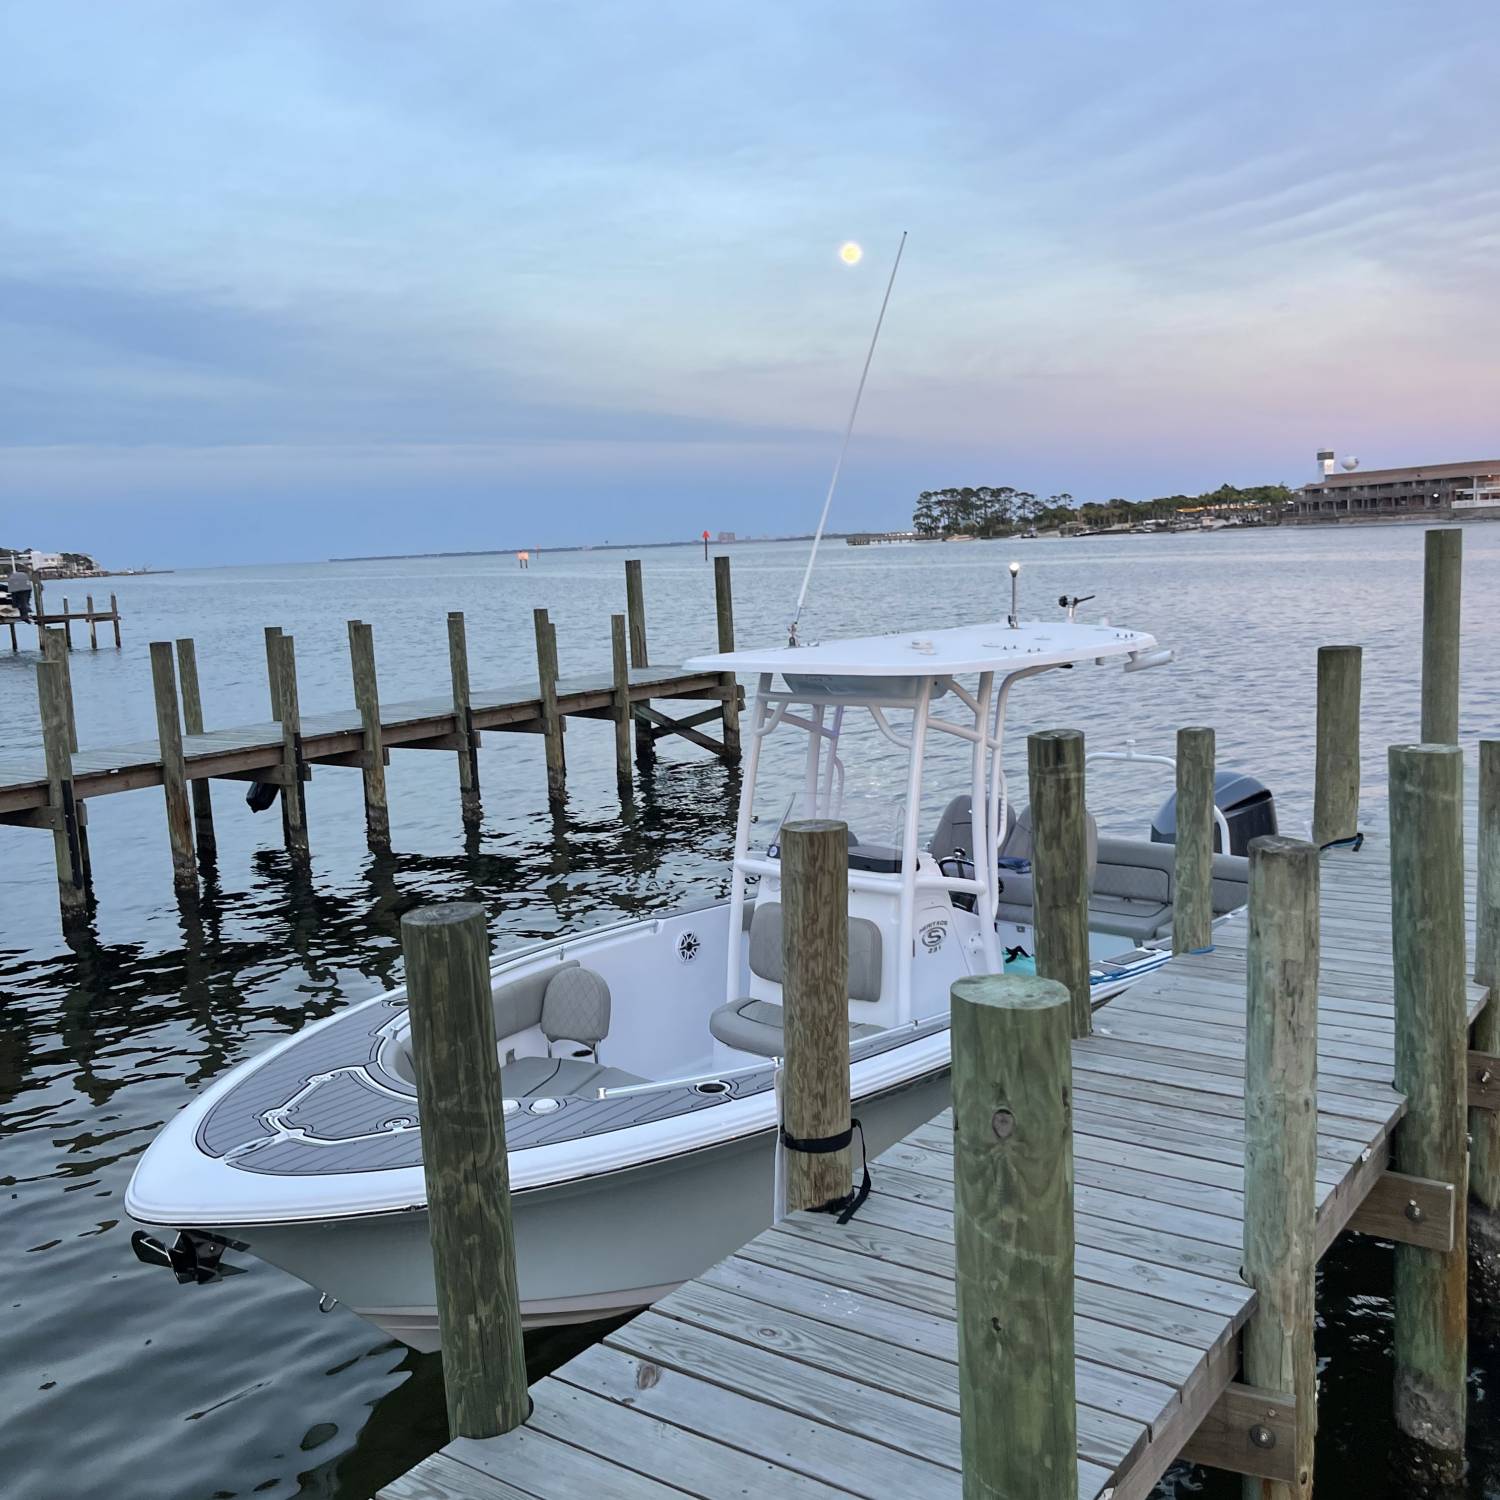 Title: Moonlight at dusk - On board their Sportsman Heritage 231 Center Console - Location: Fort Walton Beach. Participating in the Photo Contest #SportsmanMay